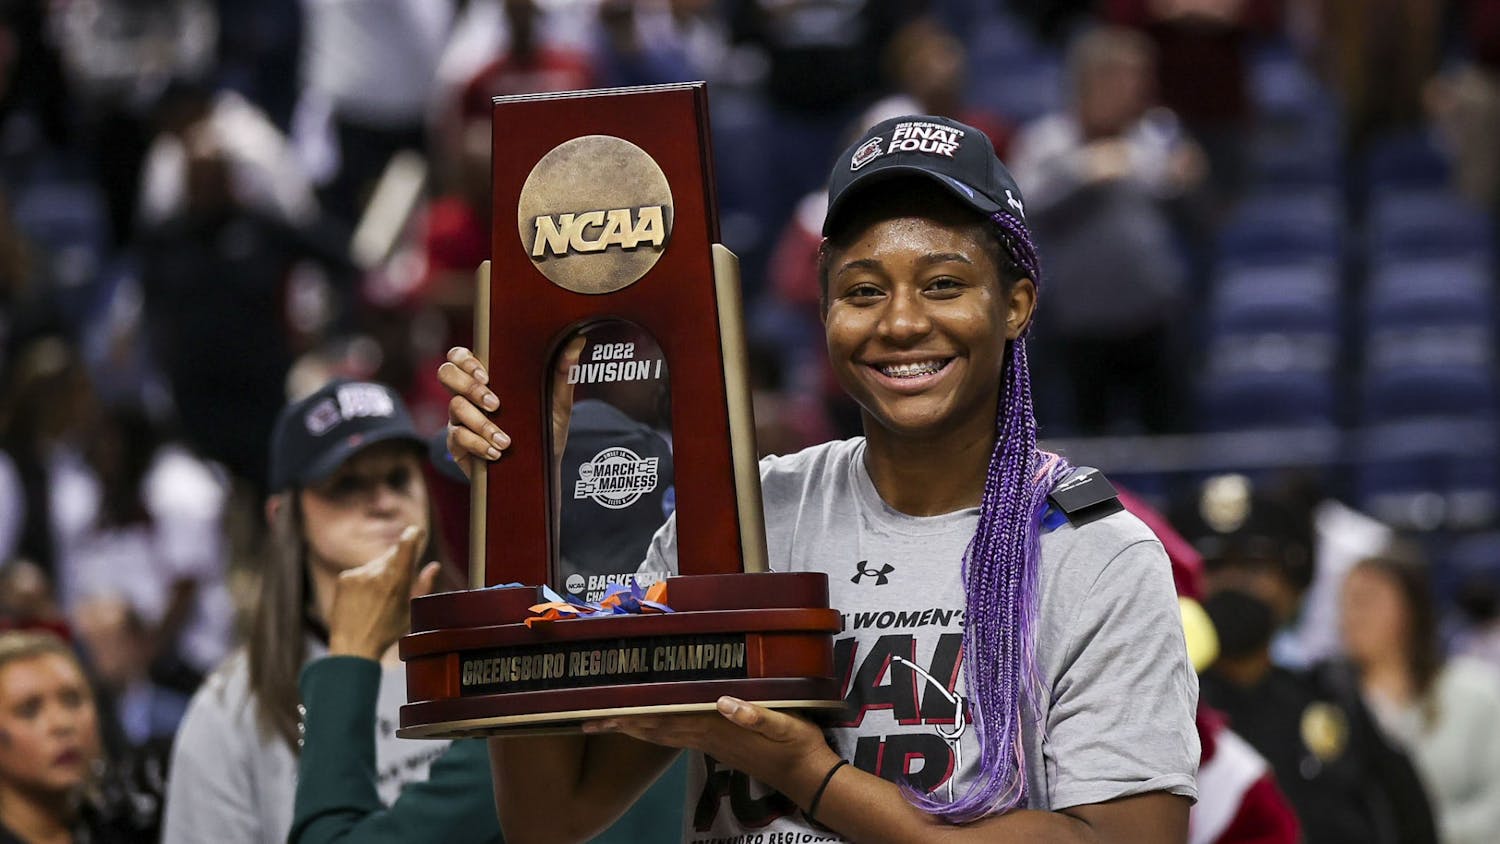 Junior forward Aliyah Boston wins Most Outstanding Player in the Greensboro Region after South Carolina's 80-50 victory over Creighton in the Elite Eight on Sunday, March 27, 2022. The victory advanced South Carolina to the Final Four.&nbsp;